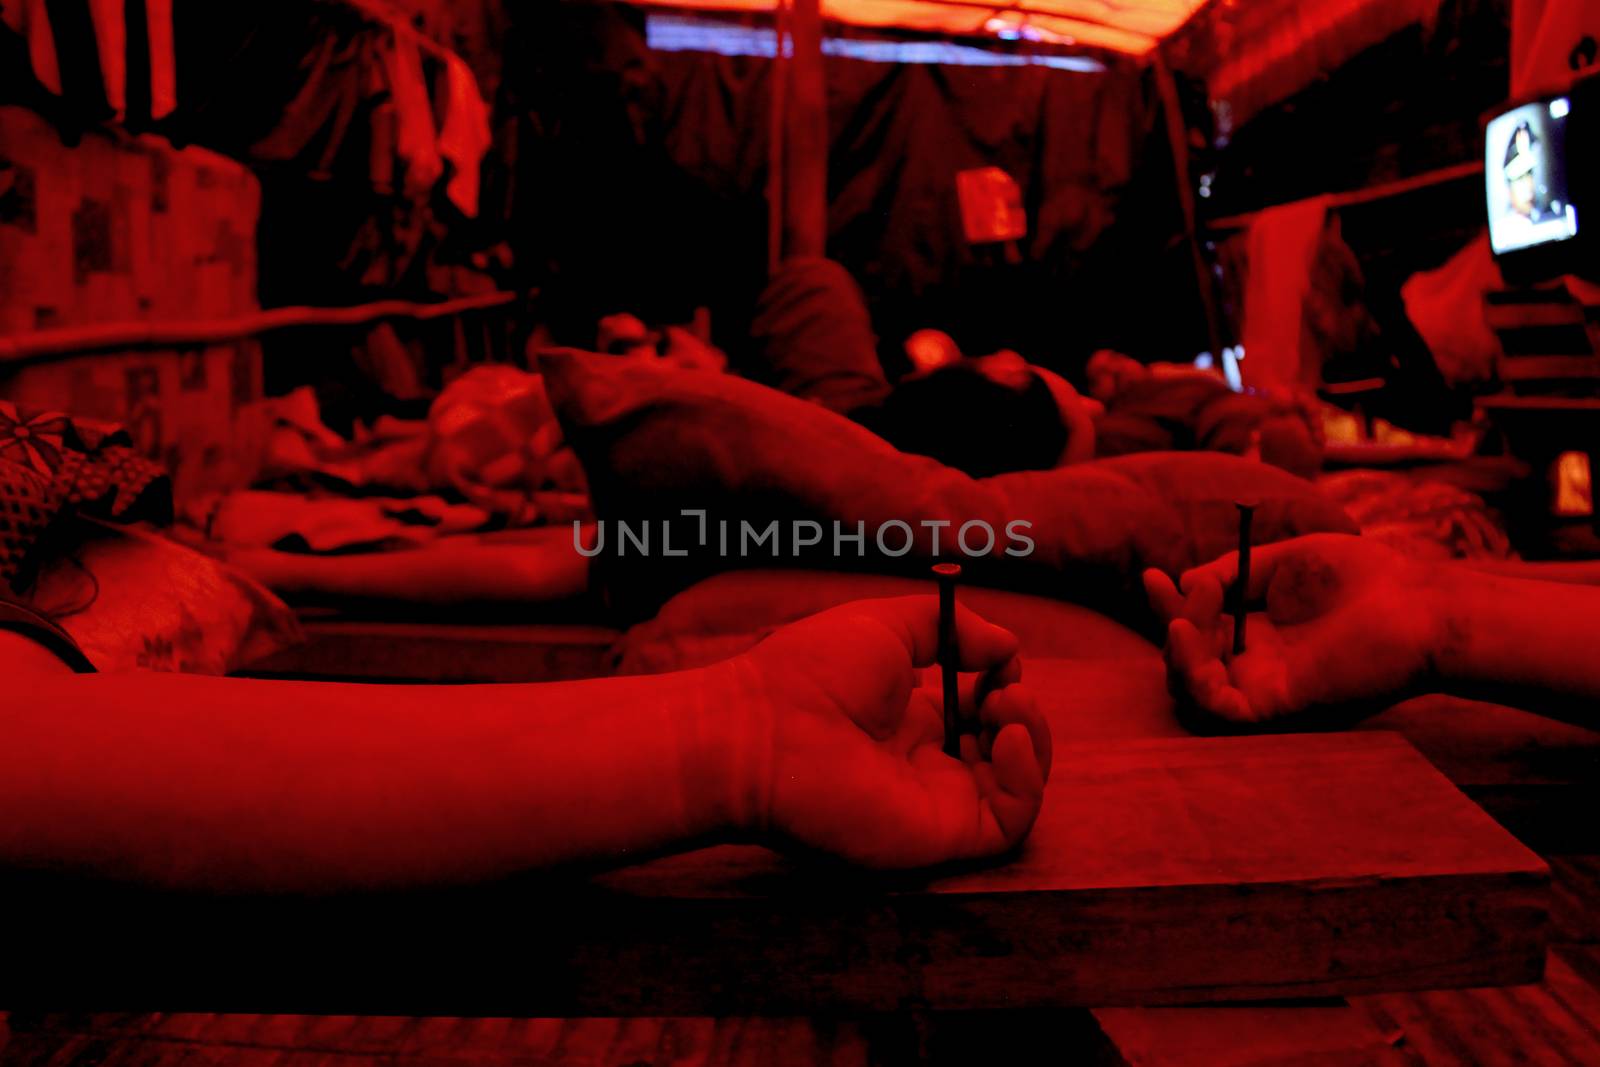 PARAGUAY, Greater Asuncion: 23 bus drivers from the firm Line 49, including one woman, lie crucified in front of the Labor, Employment and Social Security Ministry in Asuncion, on September 14, 2015. 	It has been 76 days since they started to protest after being dismissed by the company. More and more of the protesters have turned to crucifixion during this period to raise awareness of their cause. Some of them have also sewn their lips together on hunger strike. 